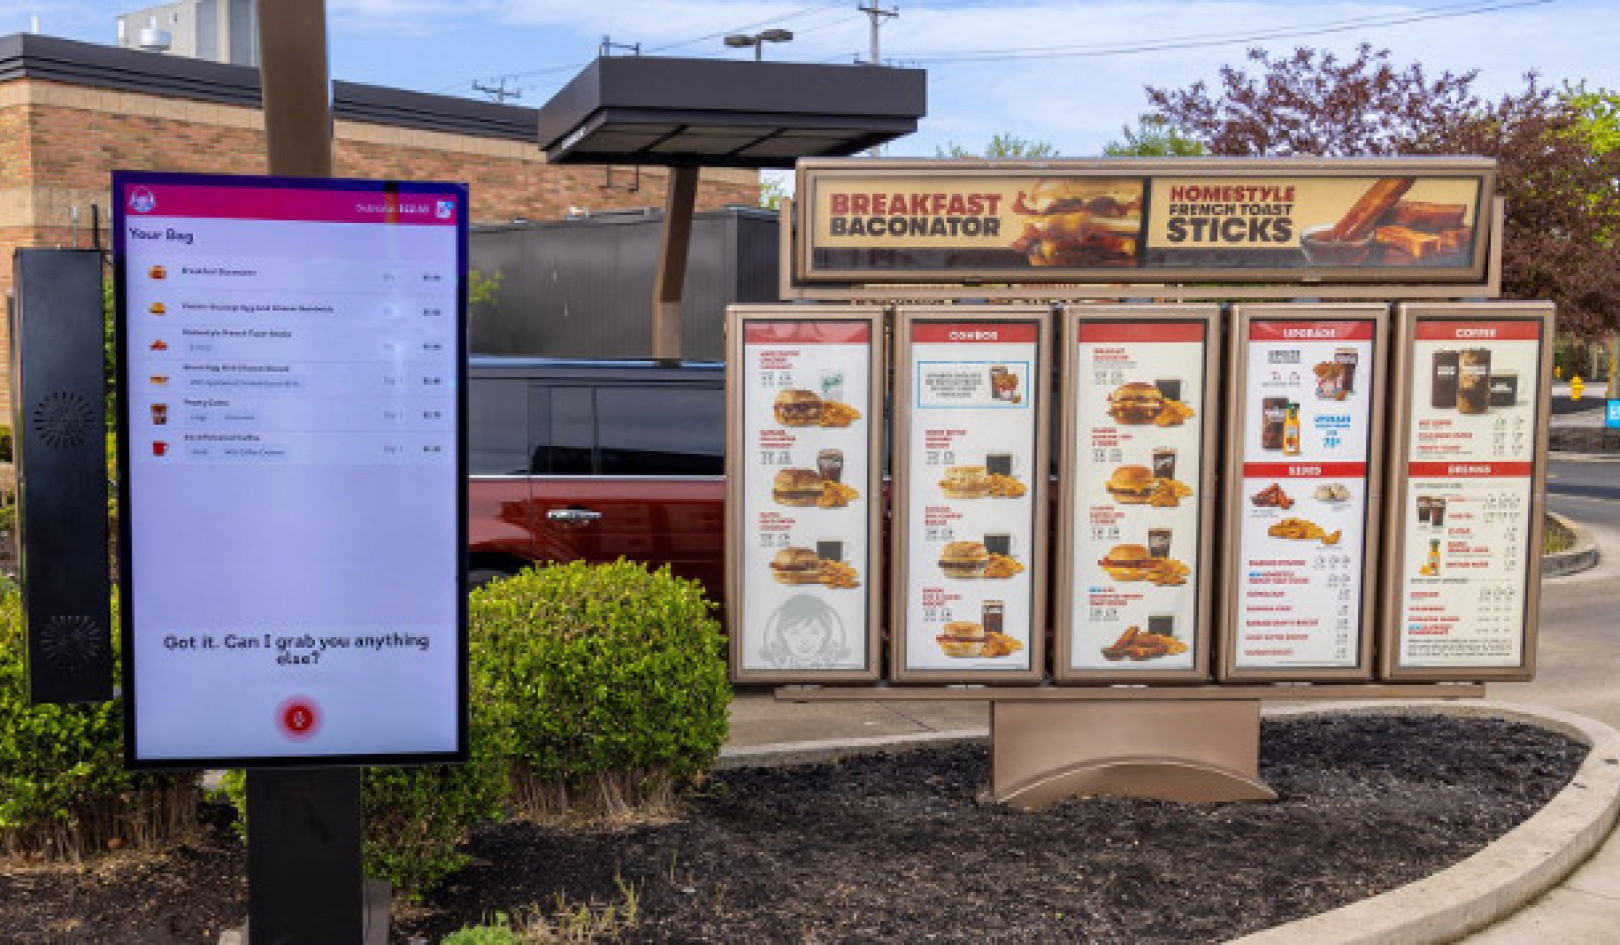 From Drive-Thru to Data Vaults: Retail AI Bots and Their Hidden Agenda